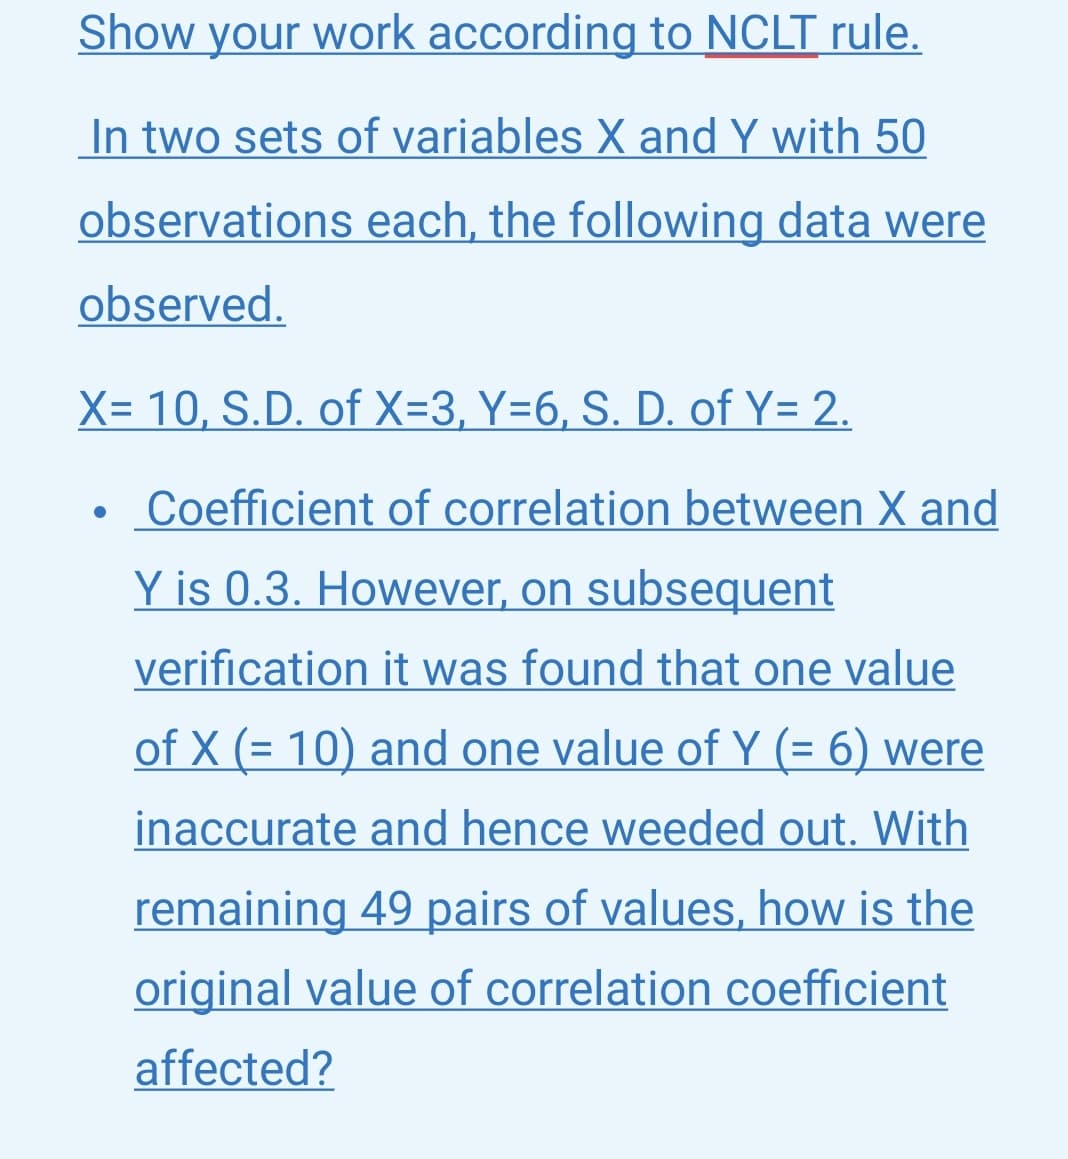 Show your work according to NCLT rule.
In two sets of variables X and Y with 50
observations each, the following data were
observed.
X= 10, S.D. of X=3, Y=6, S. D. of Y= 2.
Coefficient of correlation between X and
Y is 0.3. However, on subsequent
verification it was found that one value
of X (= 10) and one value of Y (= 6) were
inaccurate and hence weeded out. With
remaining 49 pairs of values, how is the
original value of correlation coefficient
affected?
